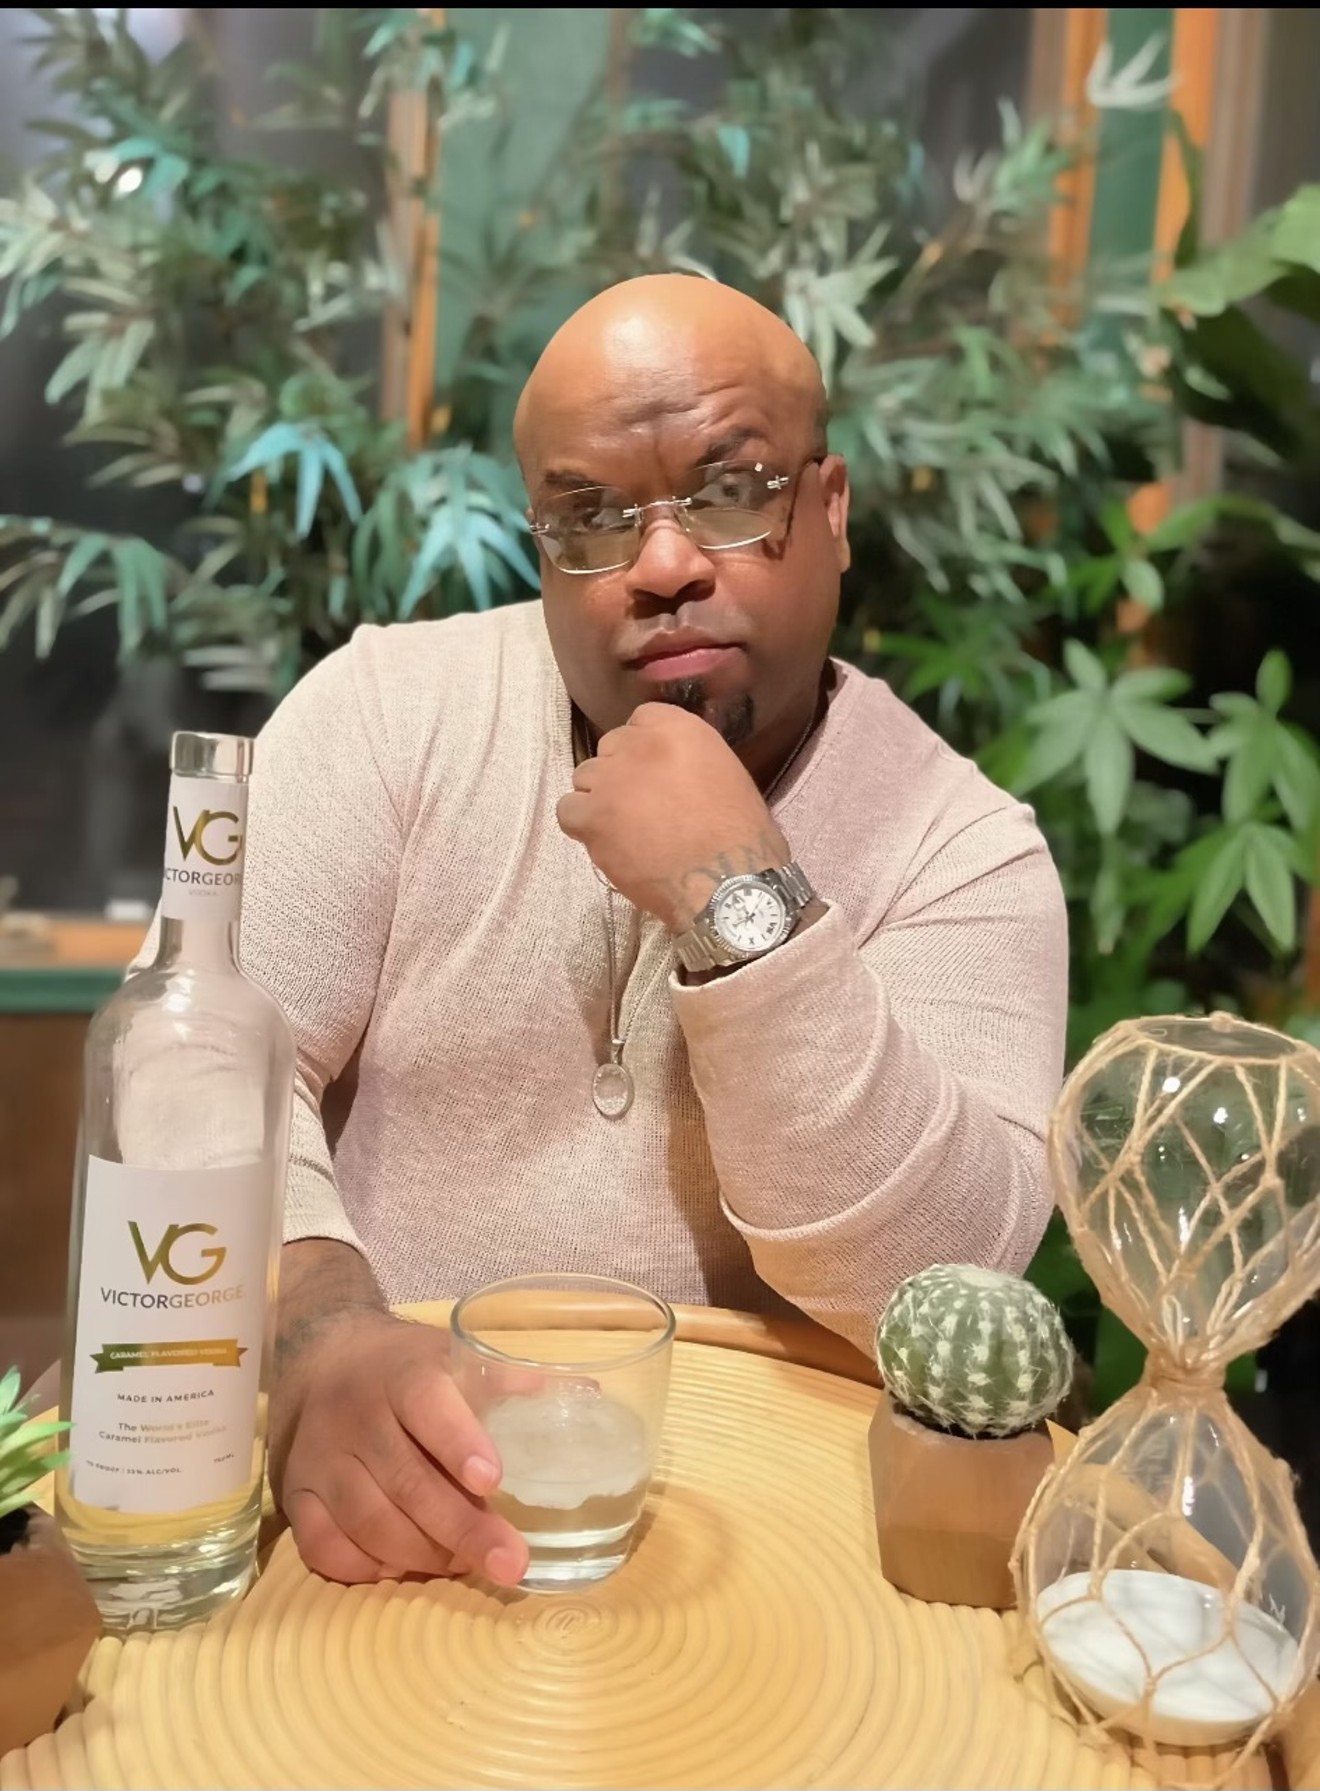 To say CeeLo Green is a fan of Victor George's caramel-infused vodka would be an understatement.